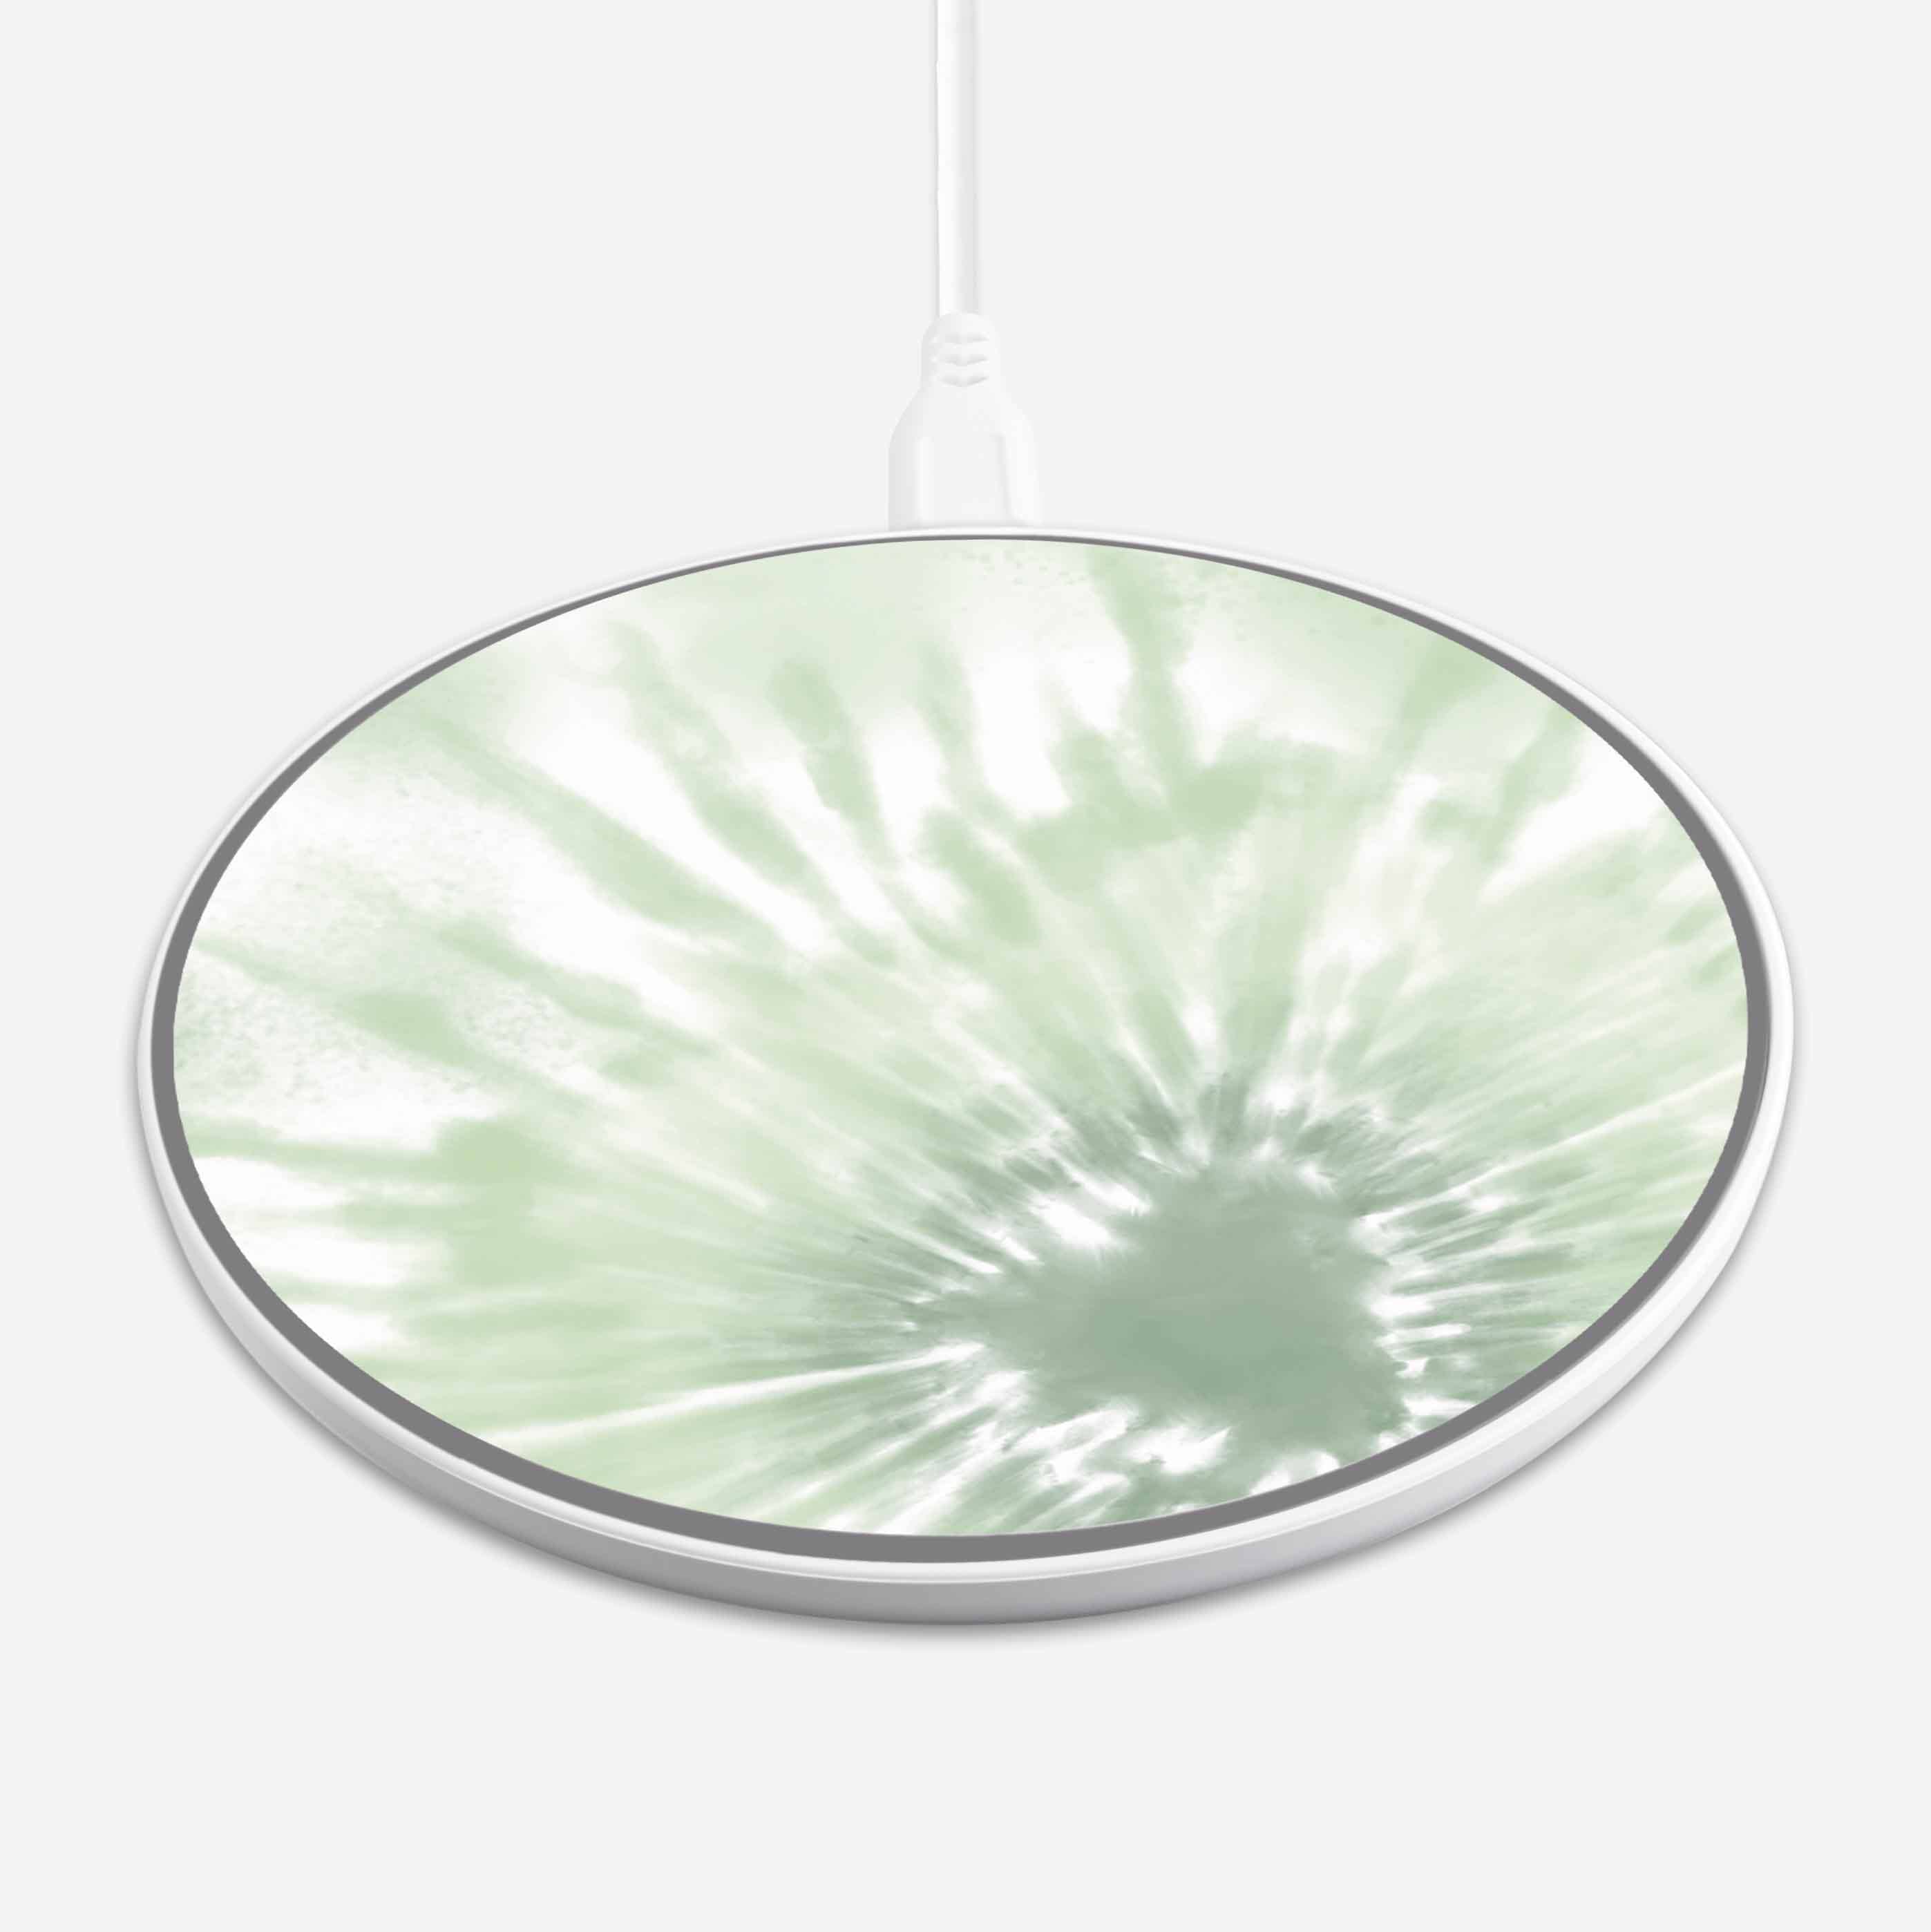 Wireless Charging Pad - Mint Green Tie Dye Design (Front View)